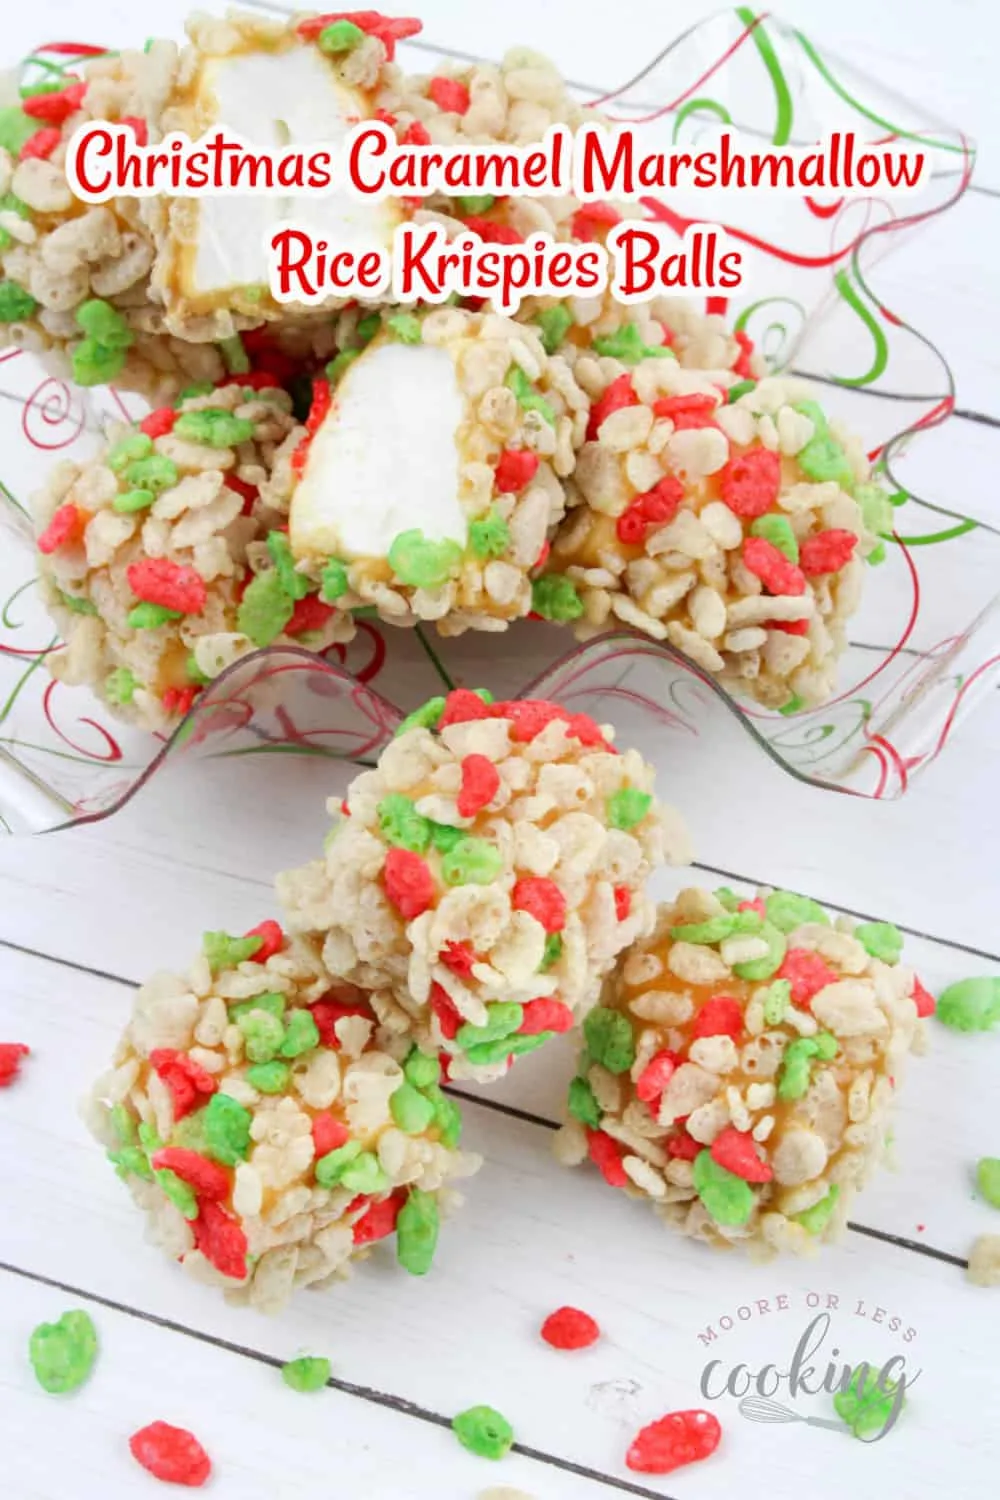 These no-bake Christmas Caramel Marshmallow Rice Krispies Balls may be the easiest dessert you make this season. They’re the perfect melt in your mouth sweet treat for the holidays! via @Mooreorlesscook